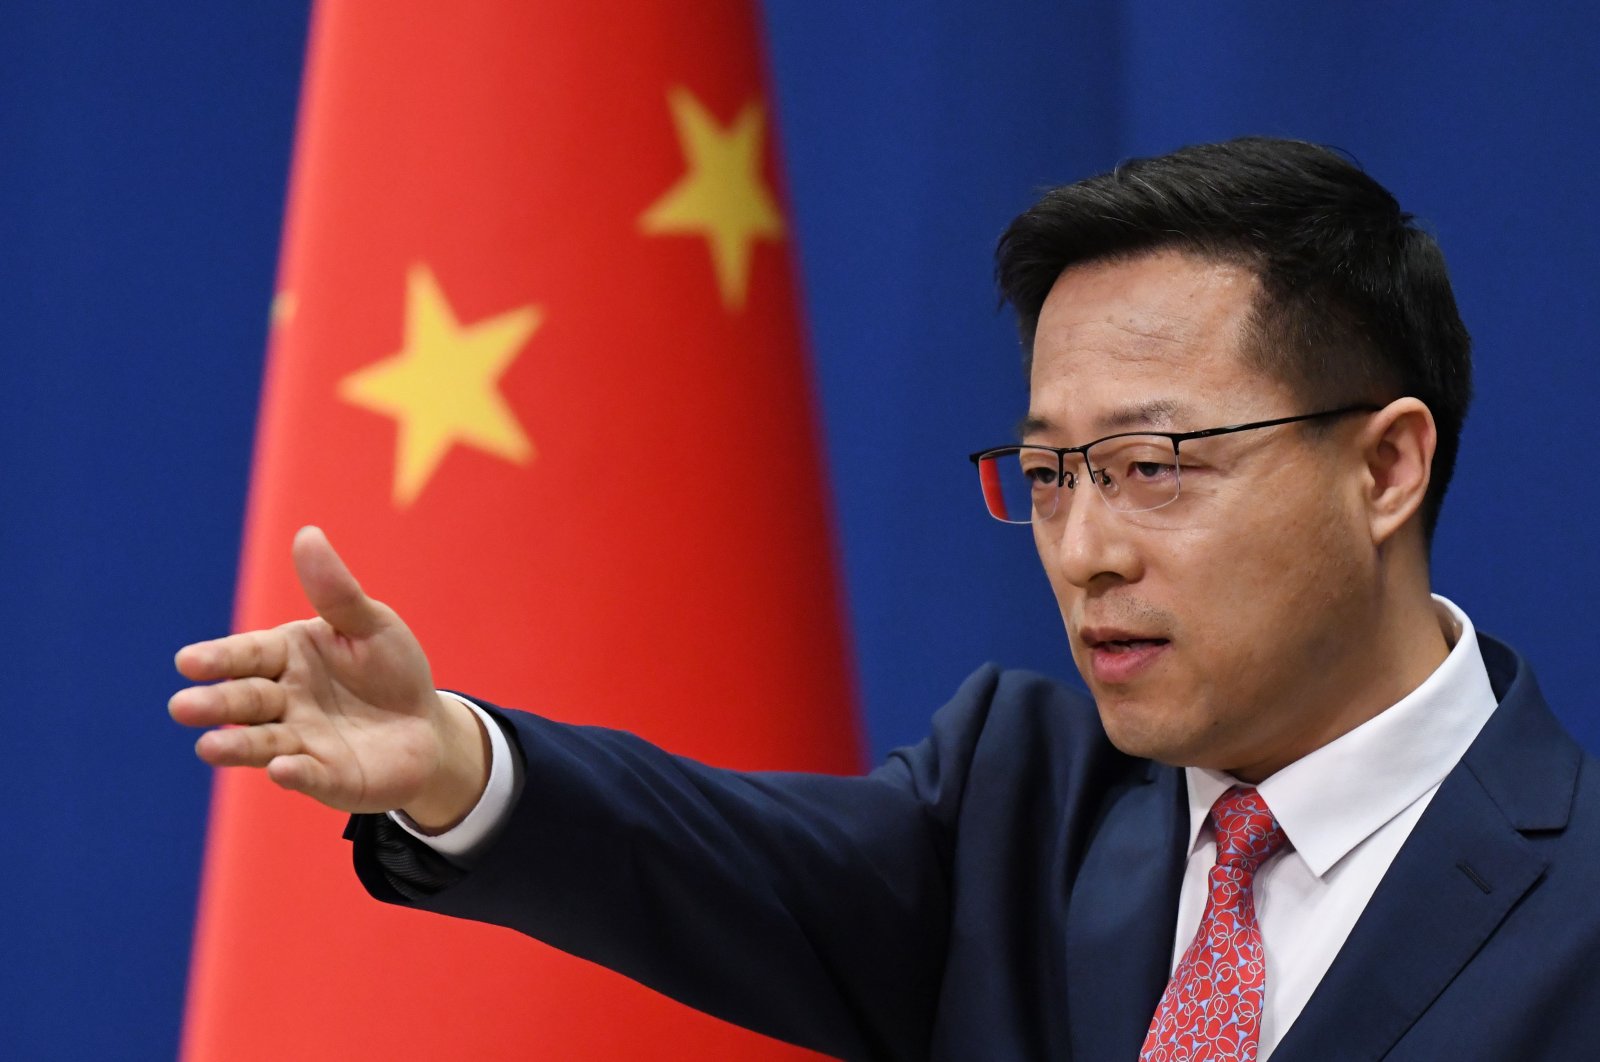 Chinese Foreign Ministry spokesman Zhao Lijian takes a question at a daily media briefing, Beijing, April 8, 2020. (AFP Photo)